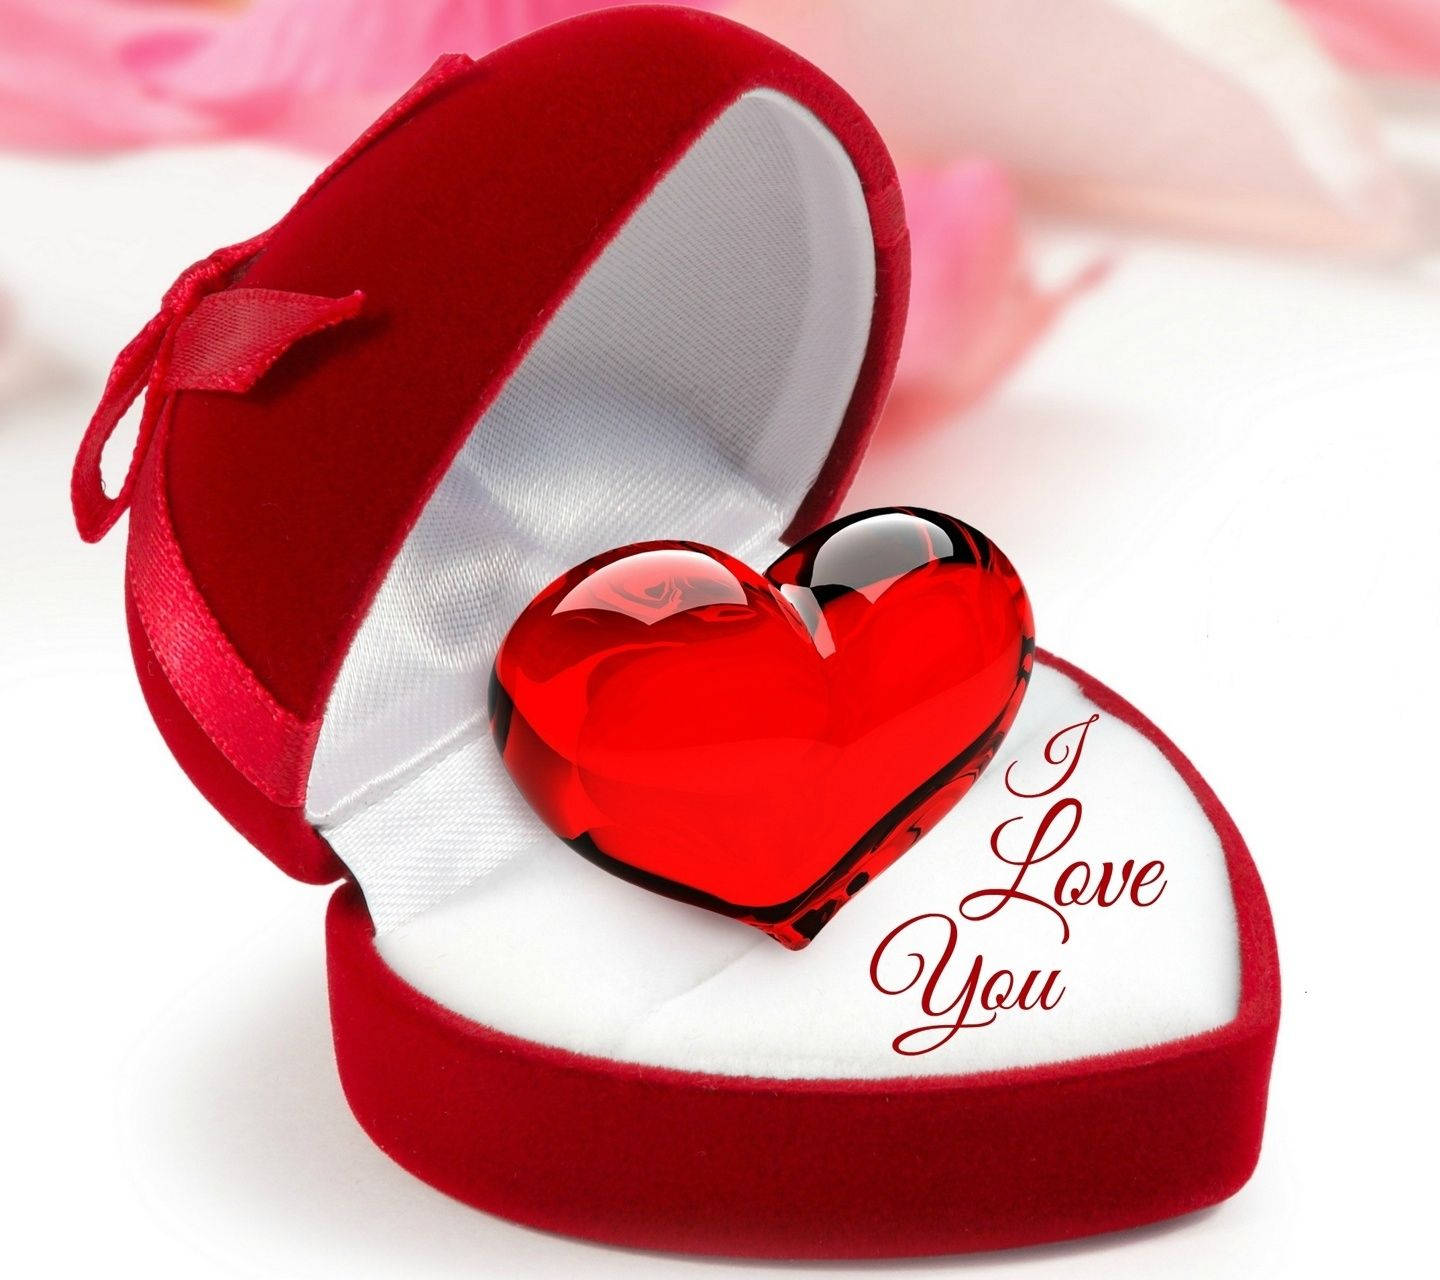 Cute Heart In Engagement Ring Box Wallpaper